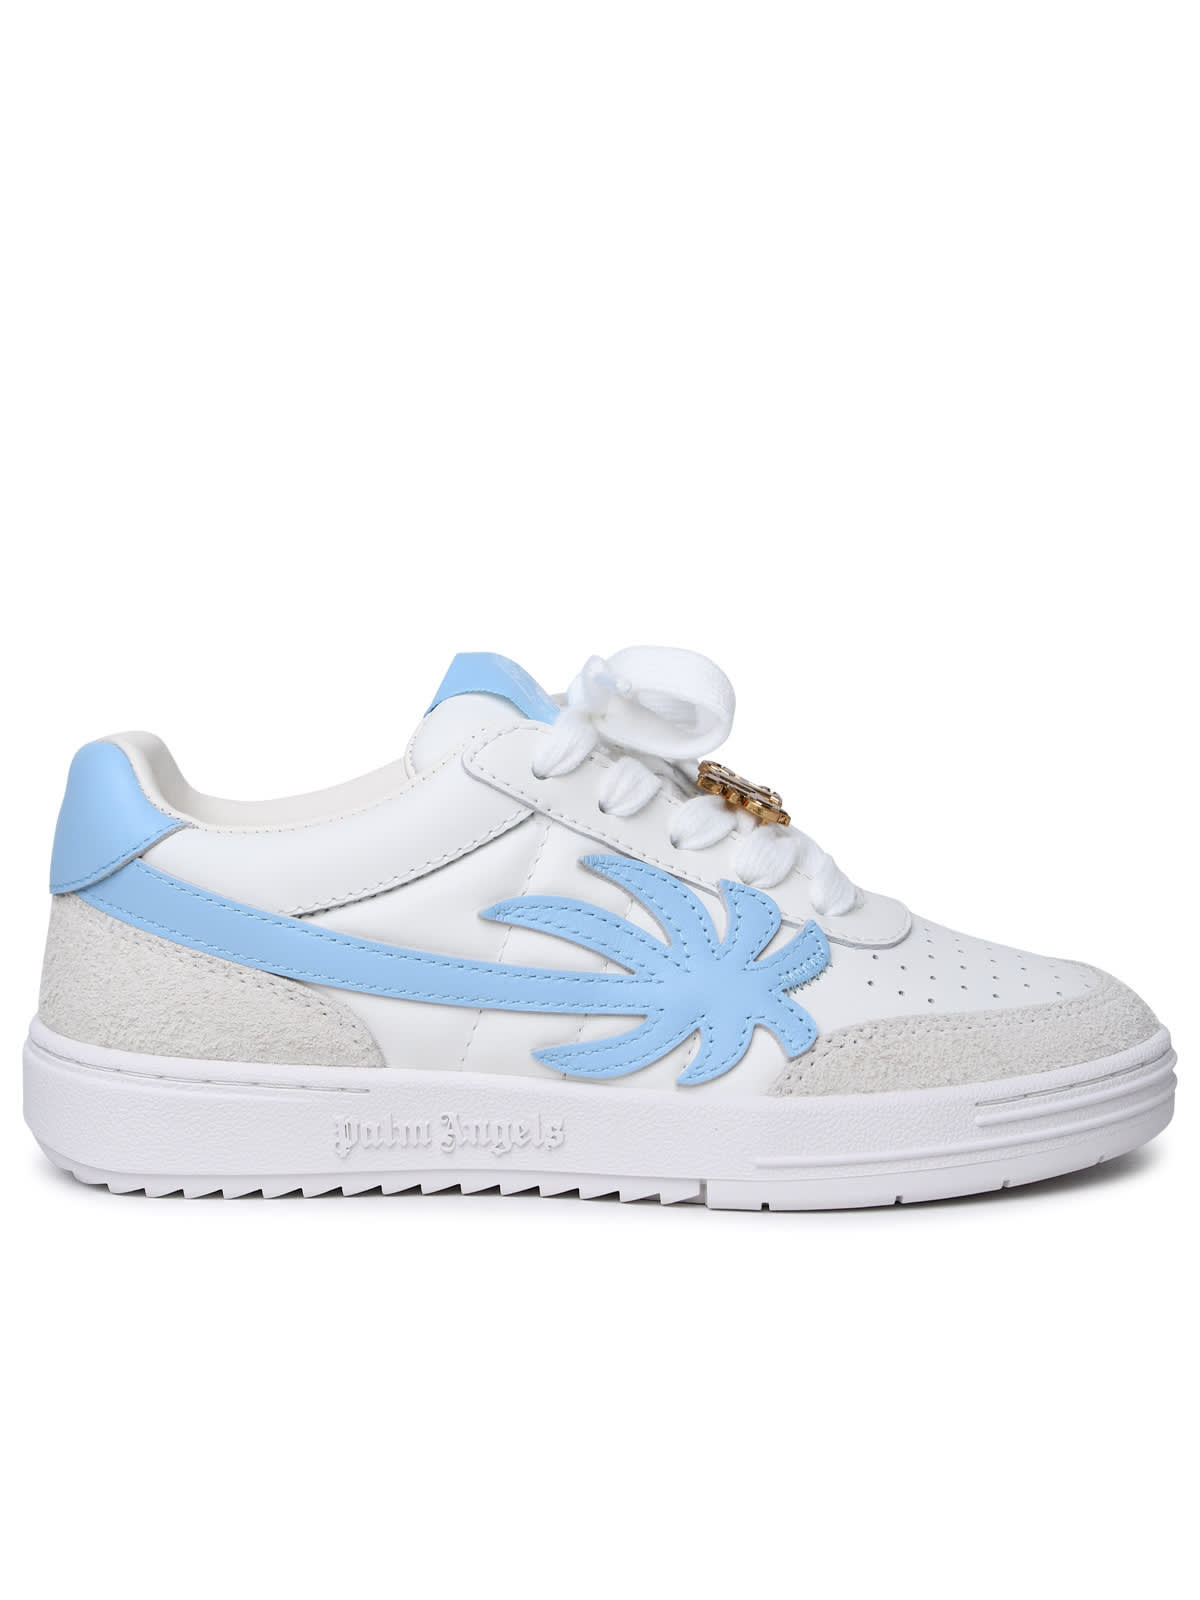 Palm Angels palm Beach University White Leather Sneakers